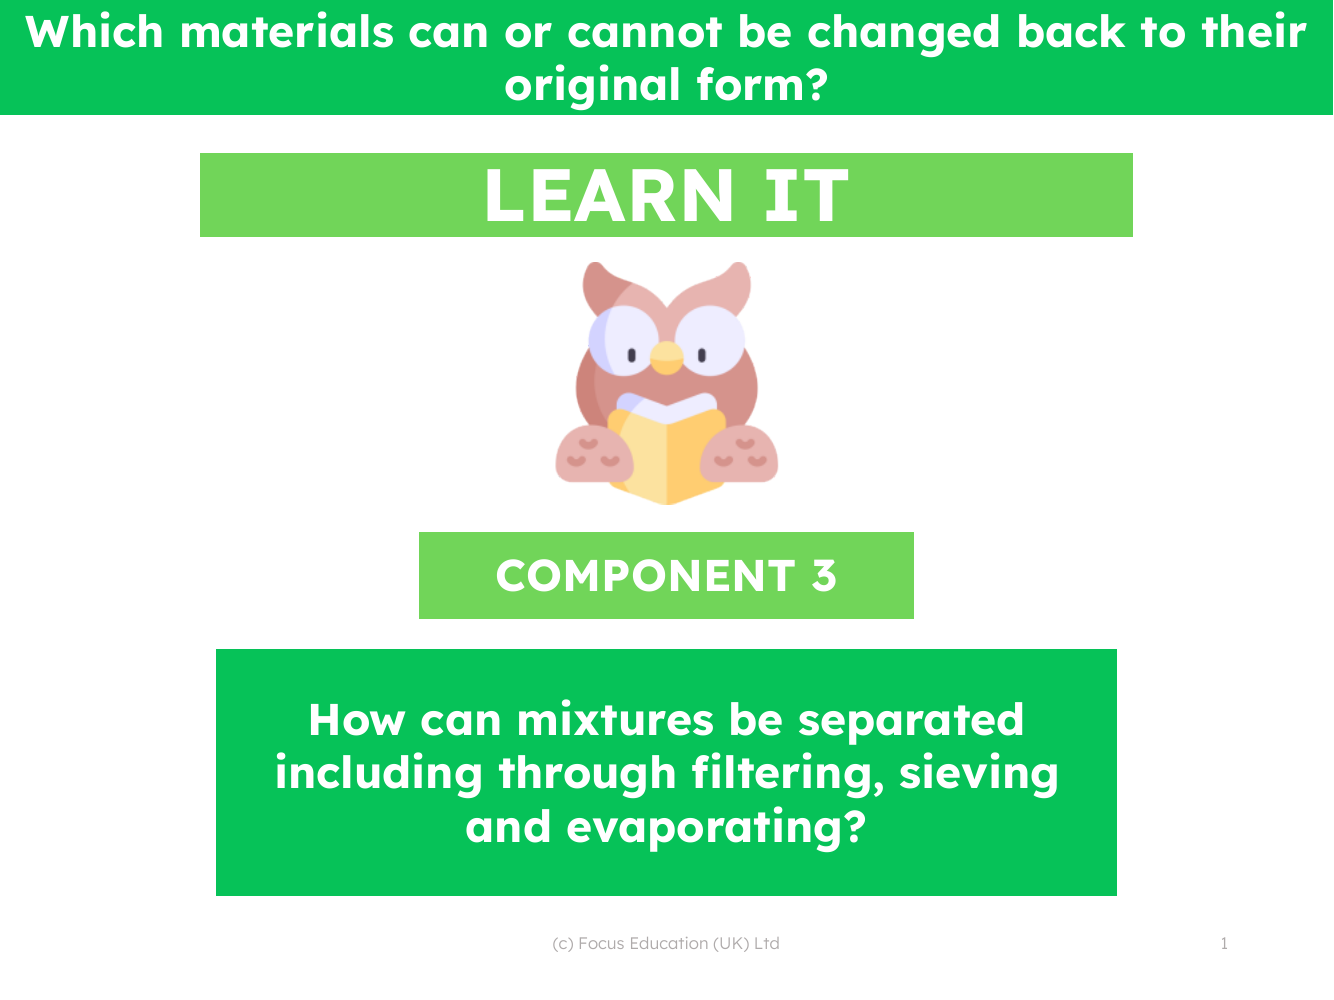 How can mixtures be separated including through filtering, sieving and evaporating? - Presentation